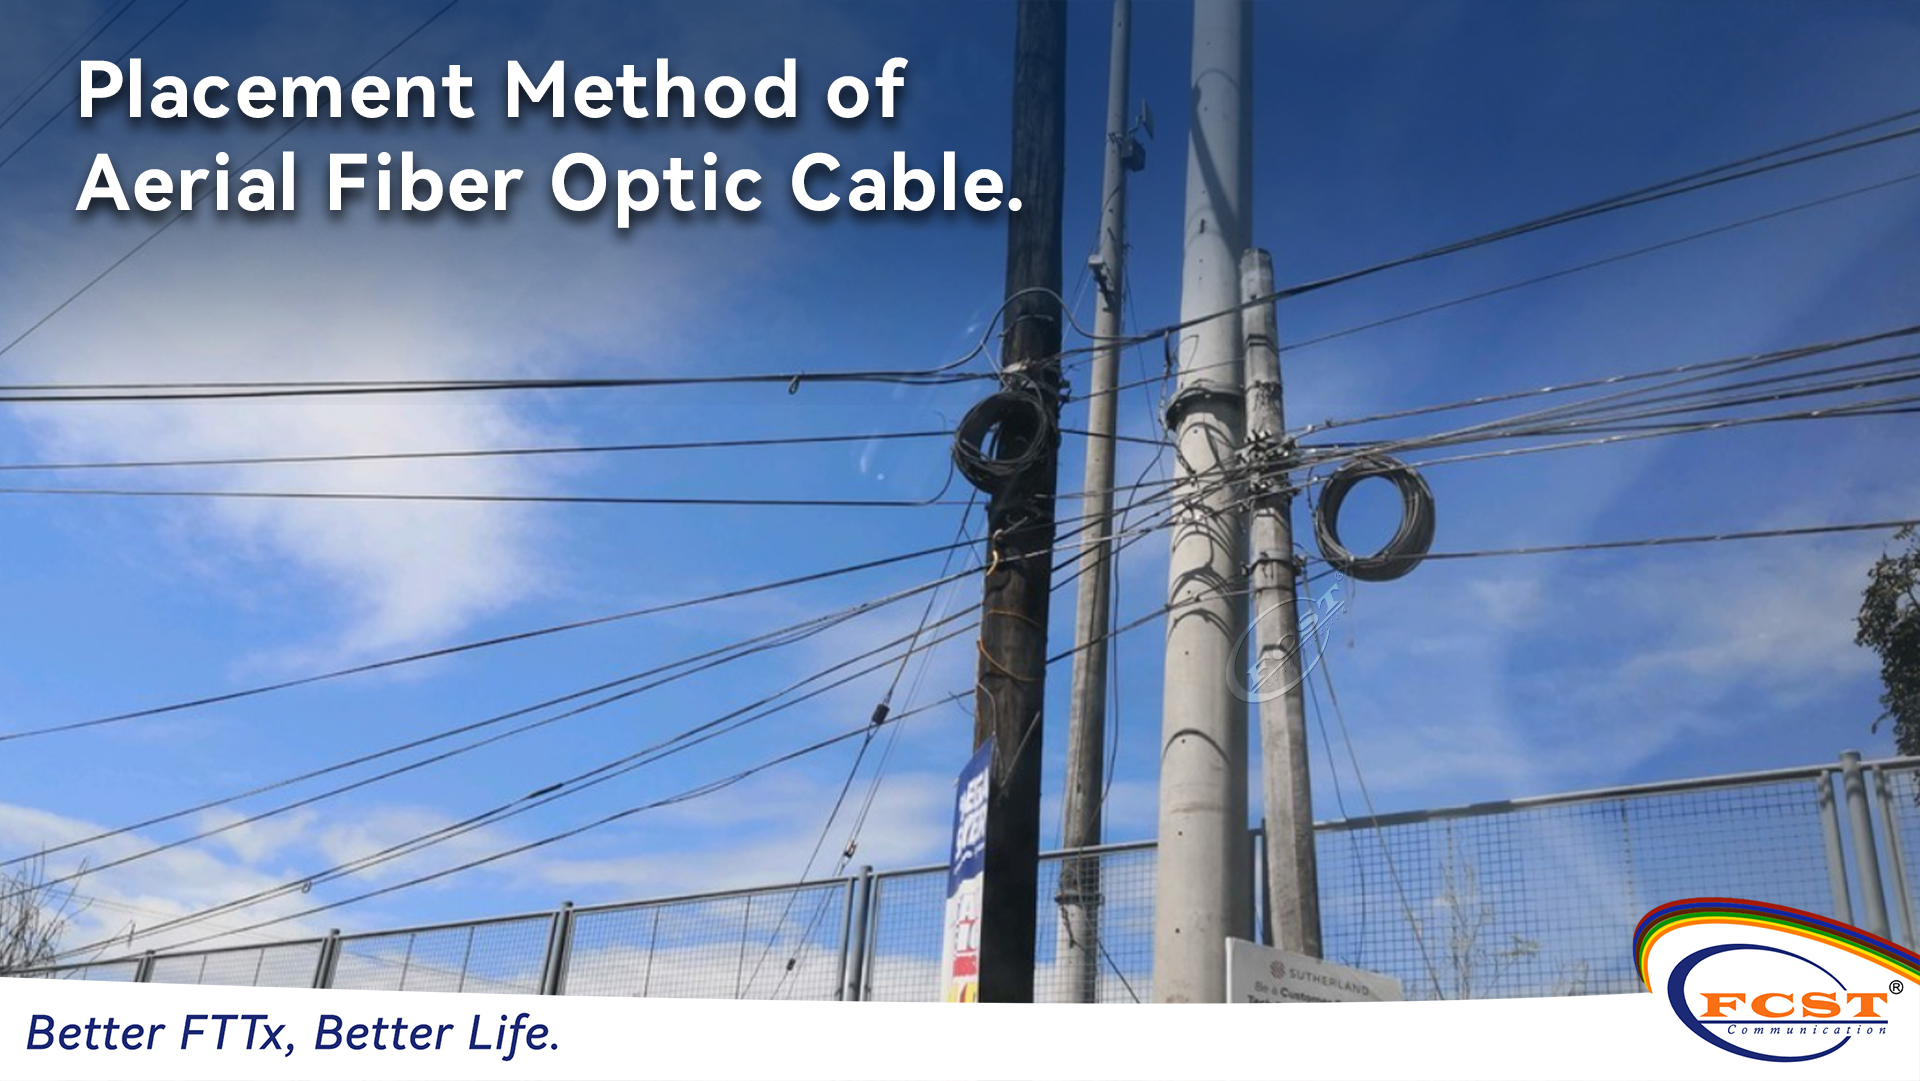 Placement Method of Aerial Fiber Optic Cable